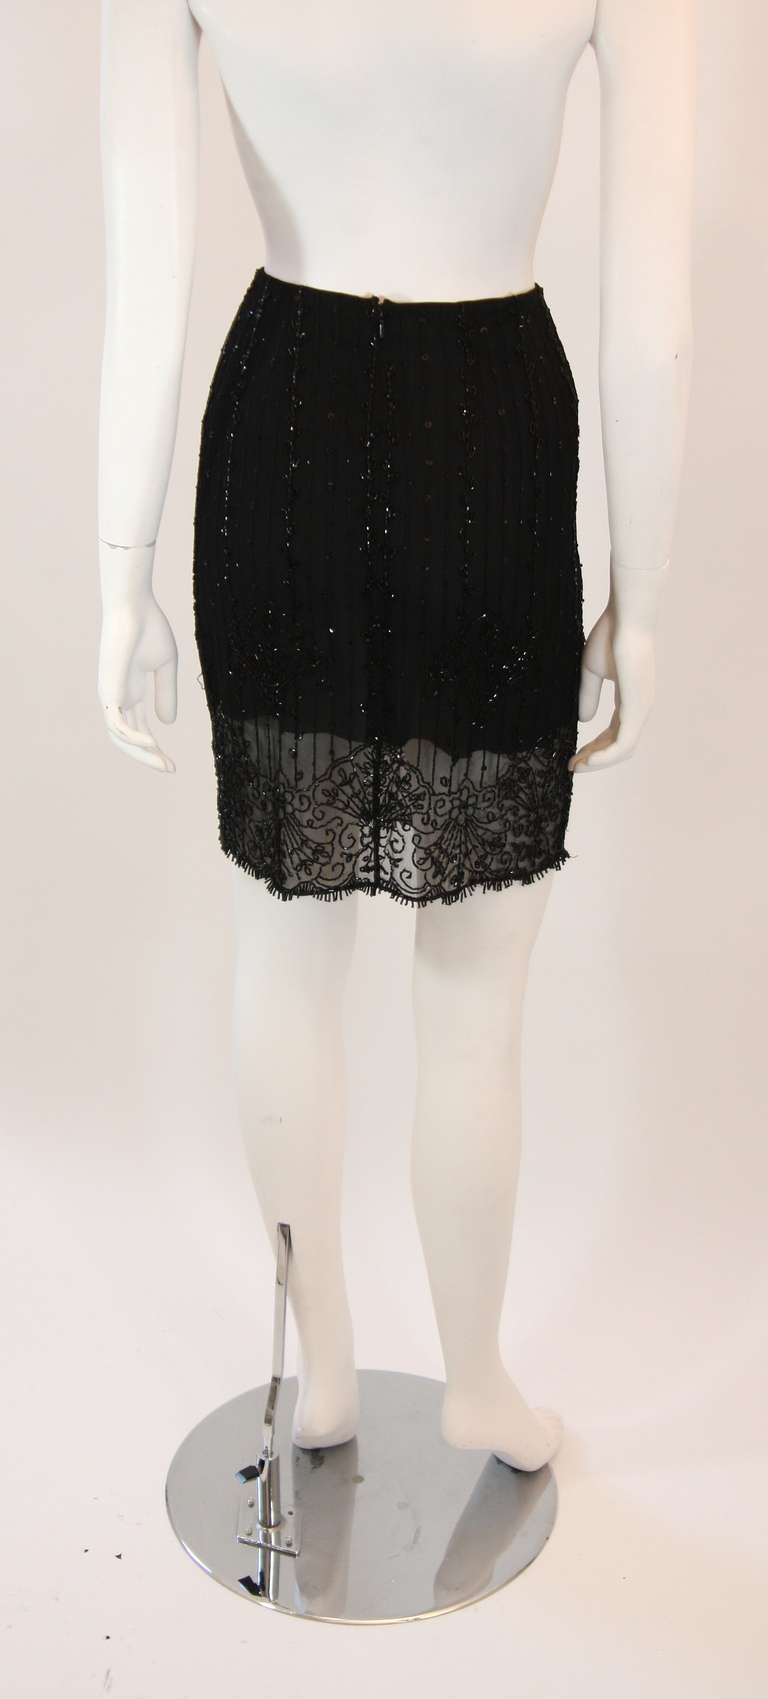 Exquisite Emanuel Ungaro Black Embellished Skirt Size Small In Excellent Condition For Sale In Los Angeles, CA